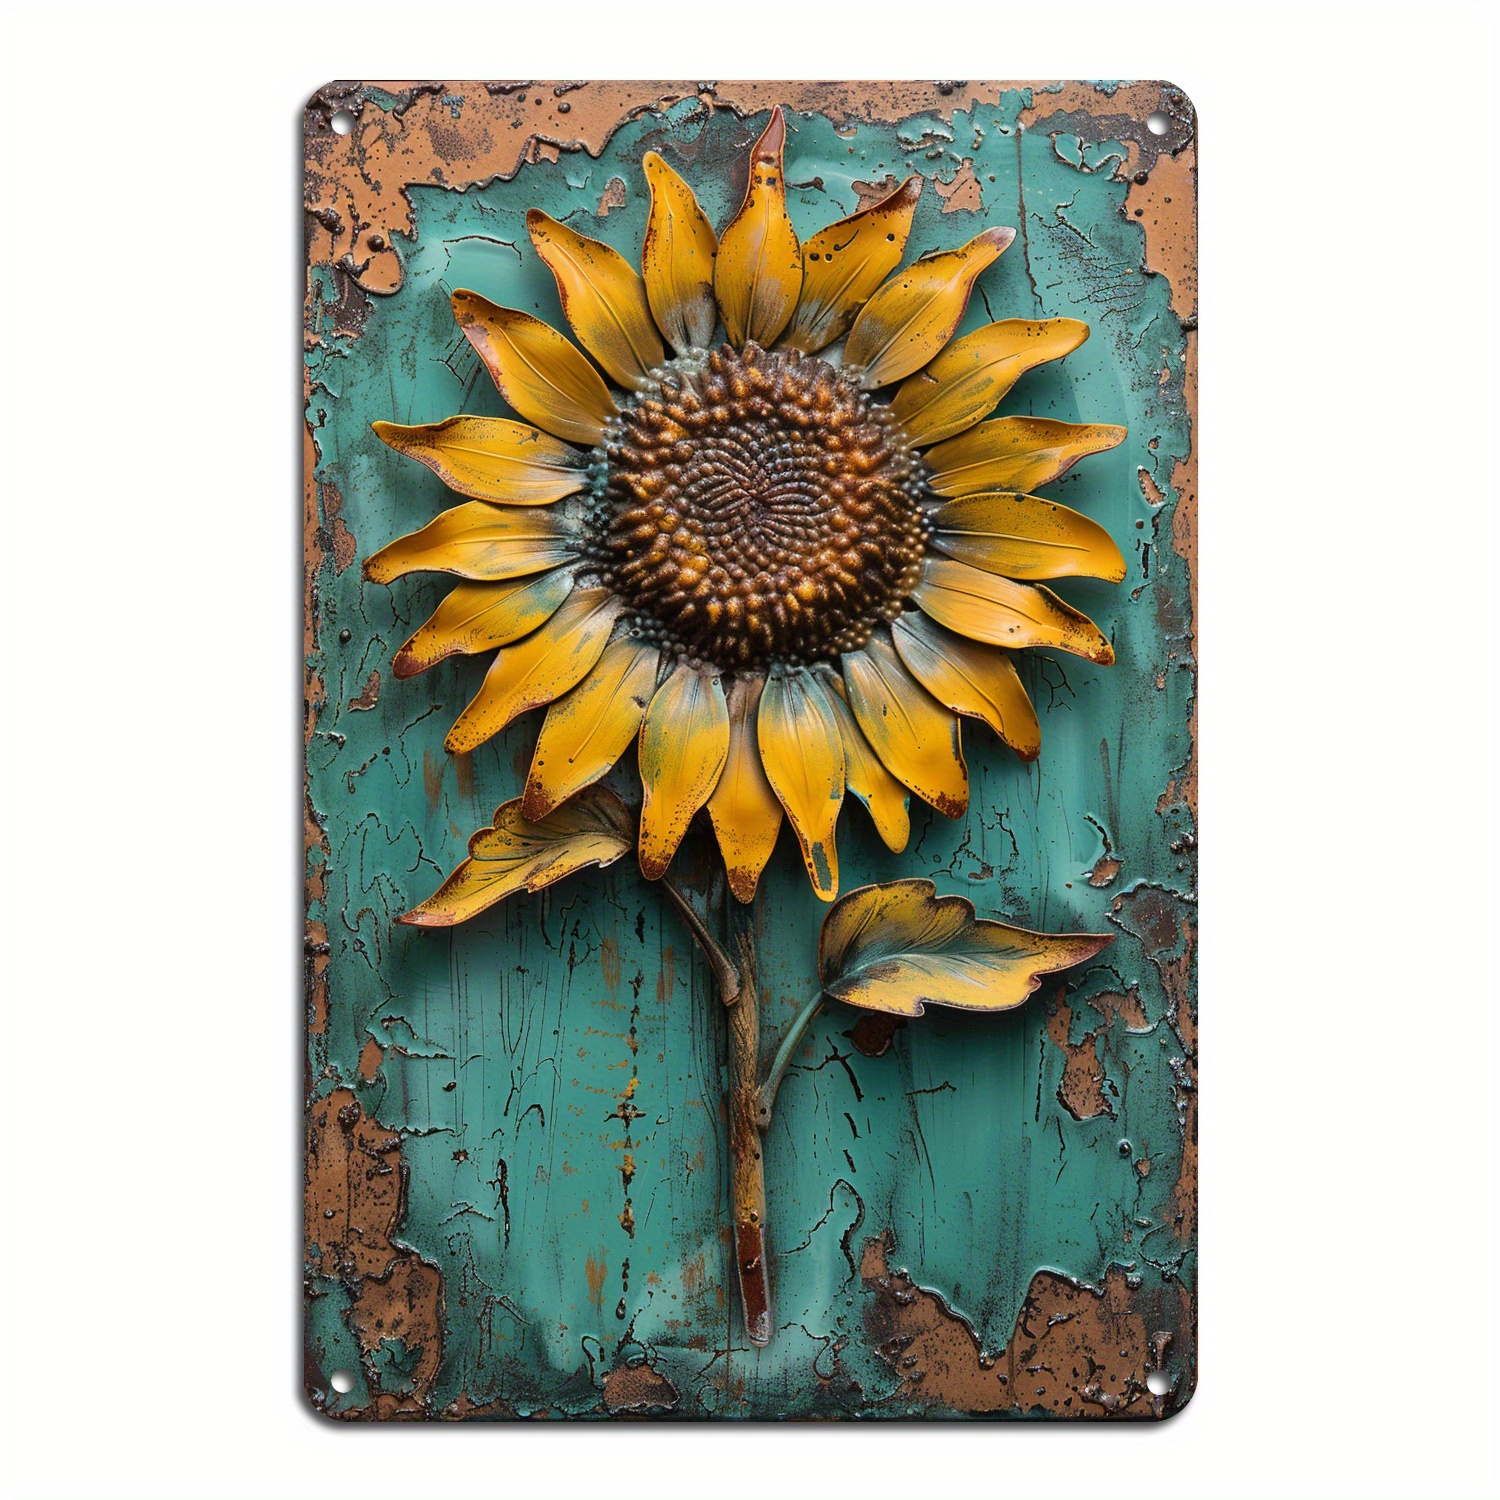 

1pc 8x12inch Cute Sunflower Metal Tin Sign, Vintage Poster Painiting, For Home Kitchen Dining Room Bedroom Garden Bathroom Garage Hotel Office Bakery Decor